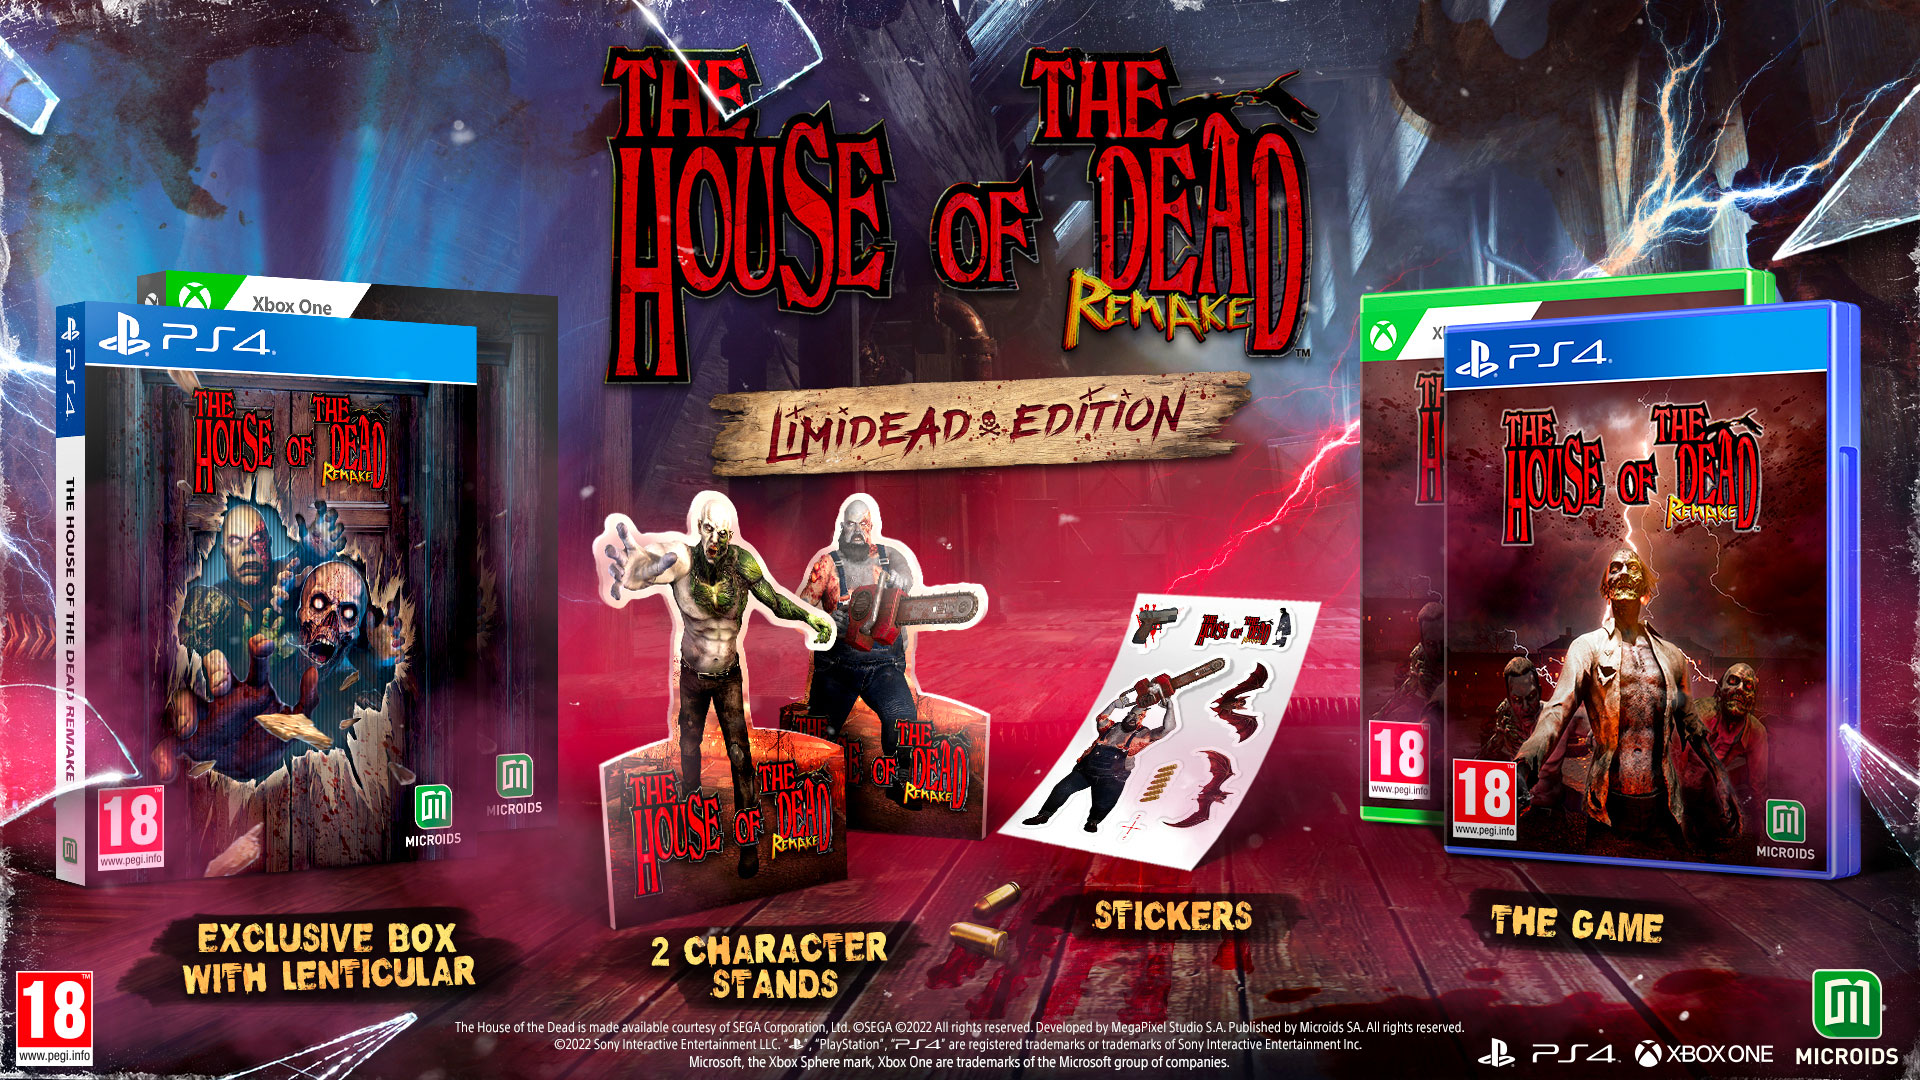 The House of the Dead: Remake Limidead Edition coming to Xbox and PlayStation